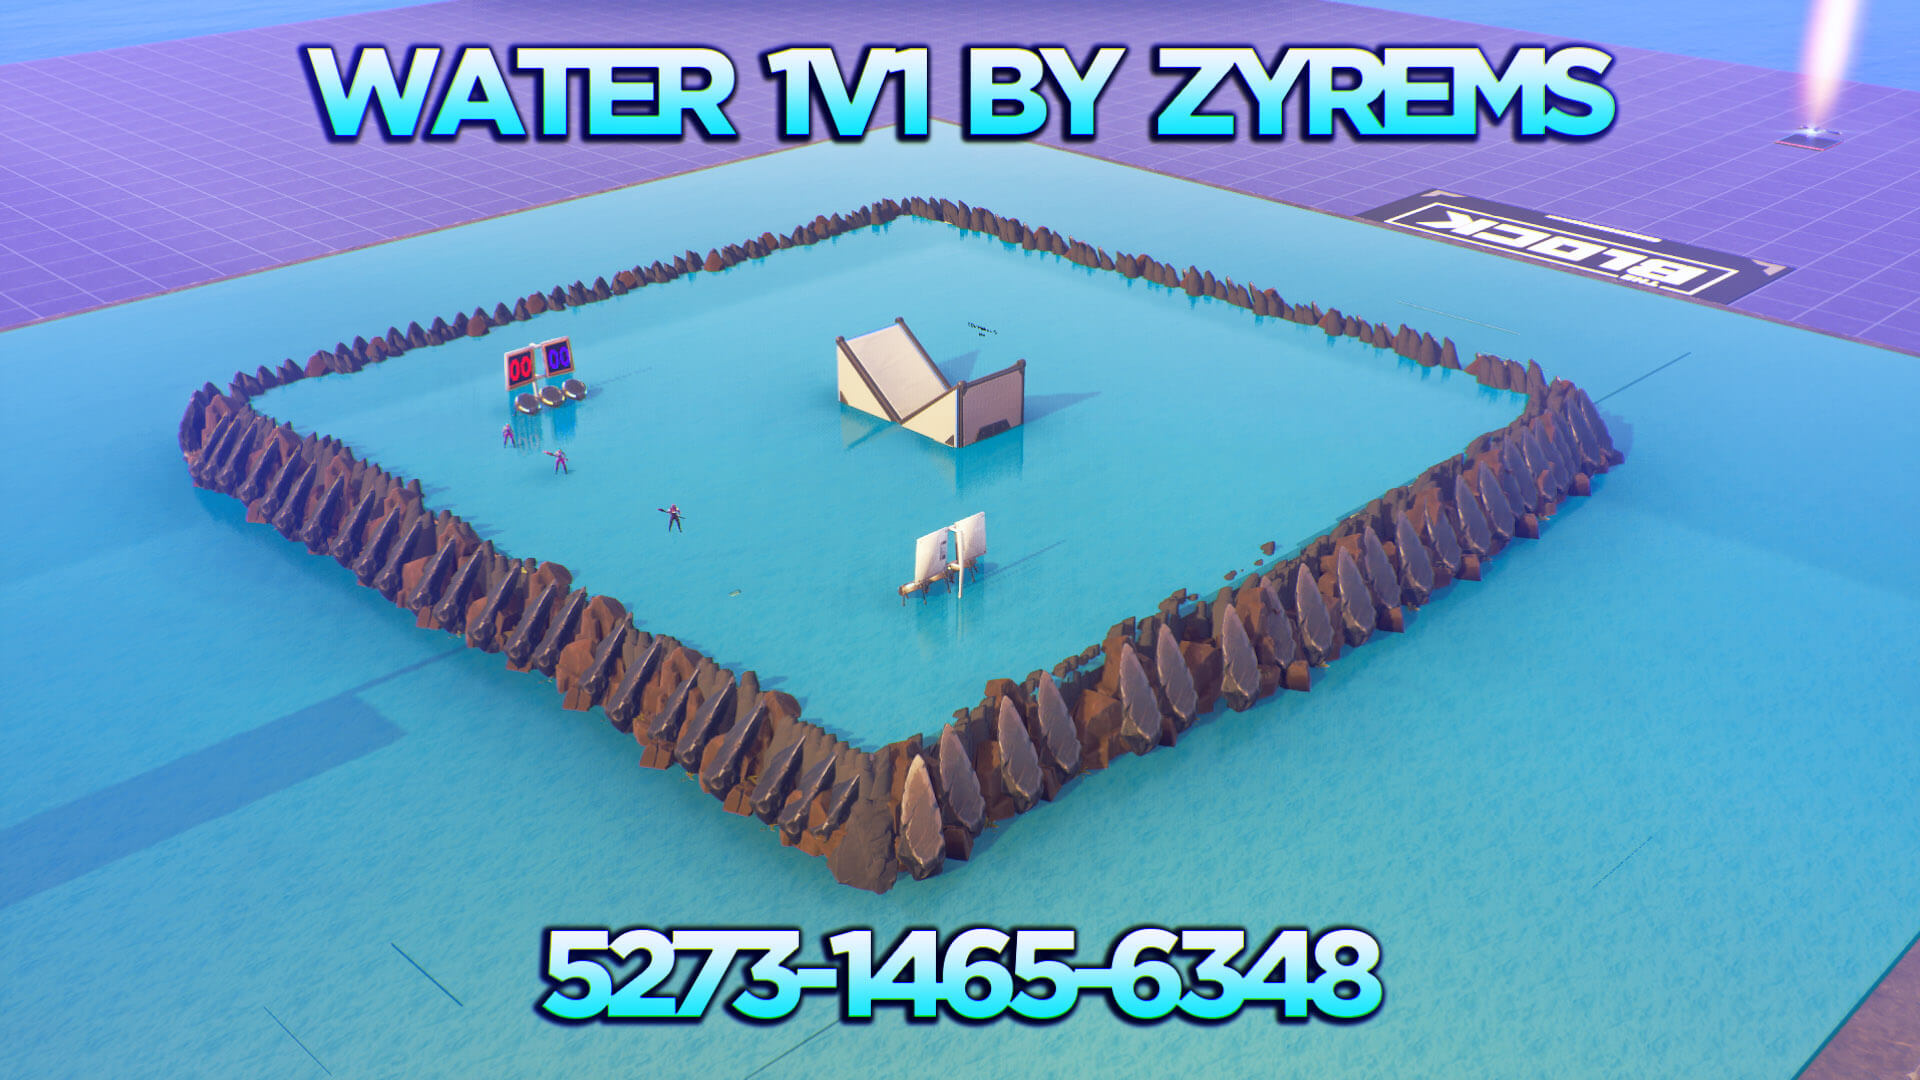 WATER 1V1 TWITTER @ZYREMS